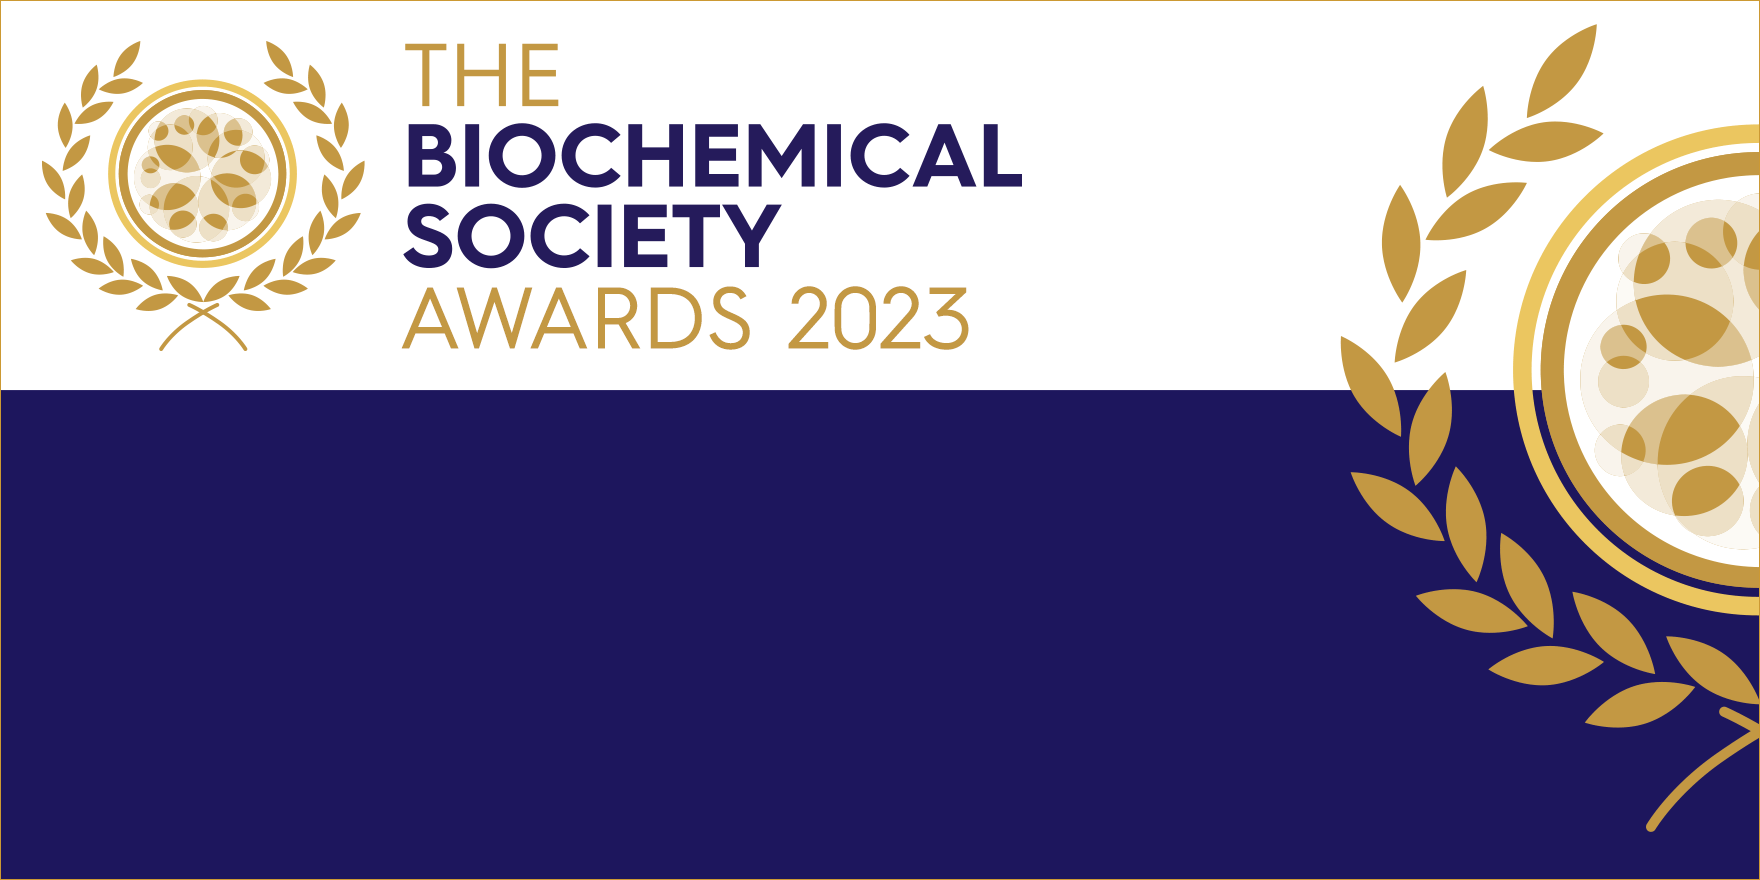 Biochemical Society Awards are presented annually to individuals, teams, and organizations in two categories: ‘Significant Breakthrough or Achievement’ and ‘Sustained Excellence’.